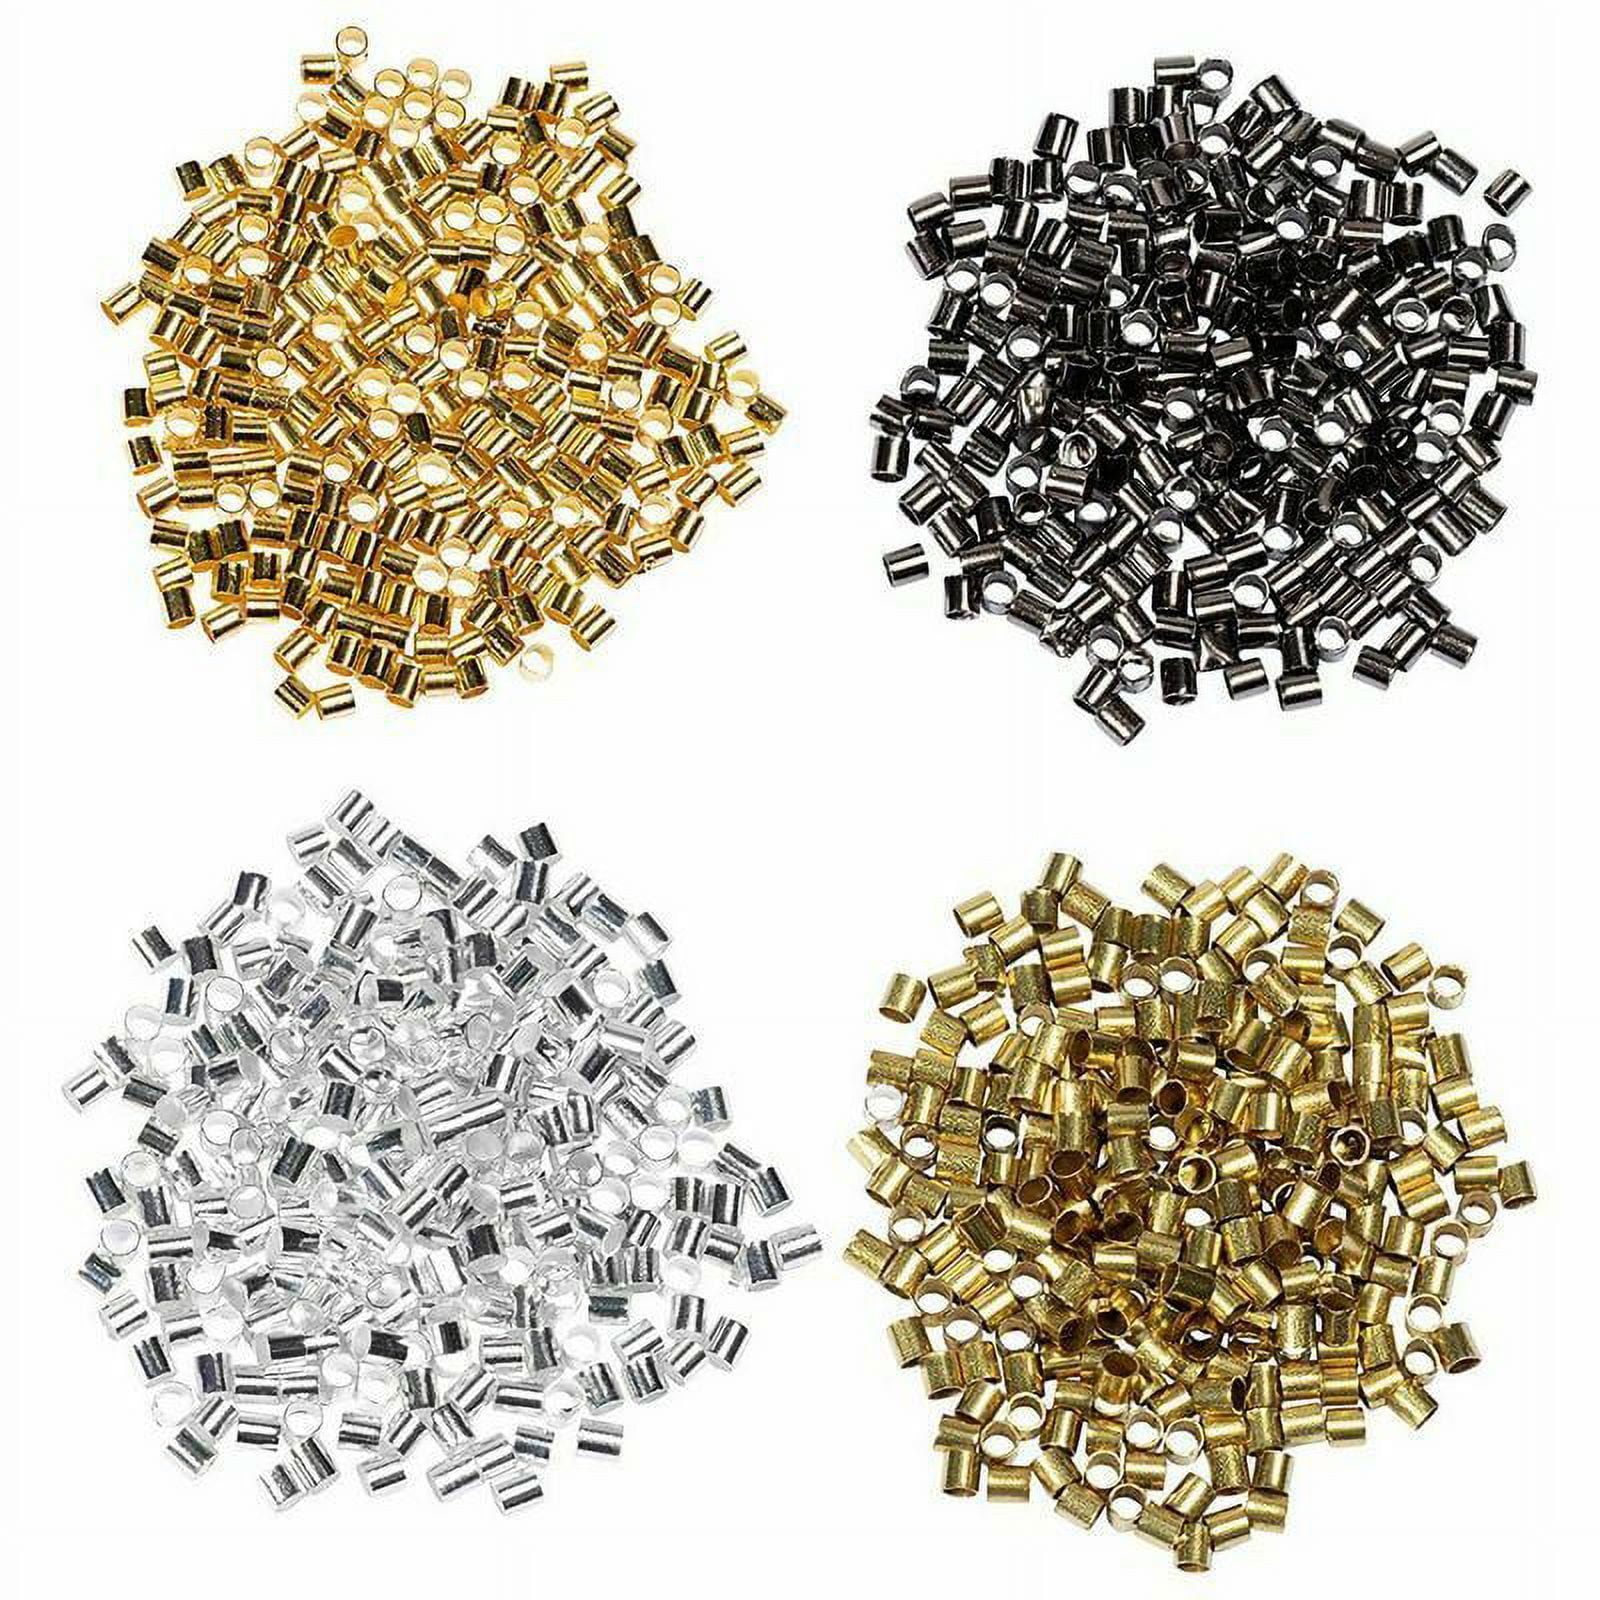 Crimp Tube Beads - 1000-Piece Tube Crimp Beads for Jewelry Making 